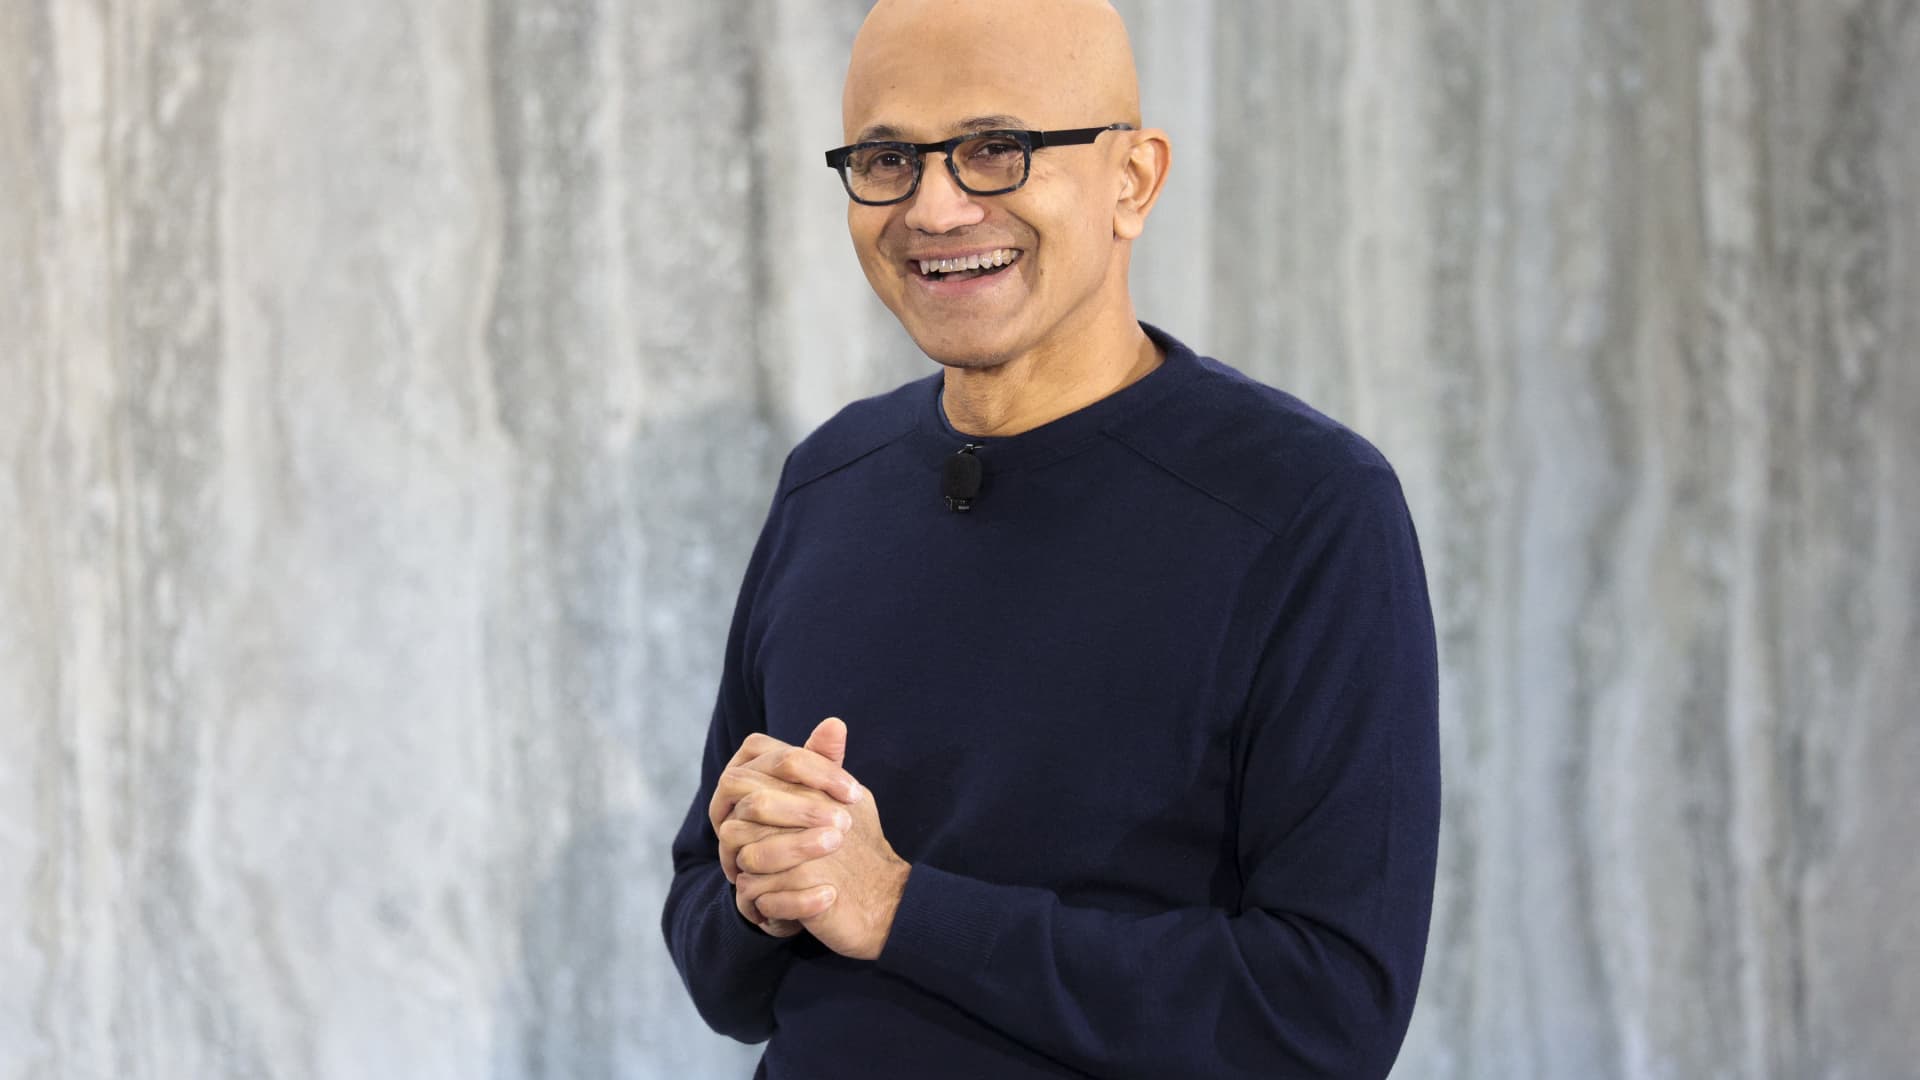 Microsoft is 'in the lead' with cloud-based AI workloads, Nadella says